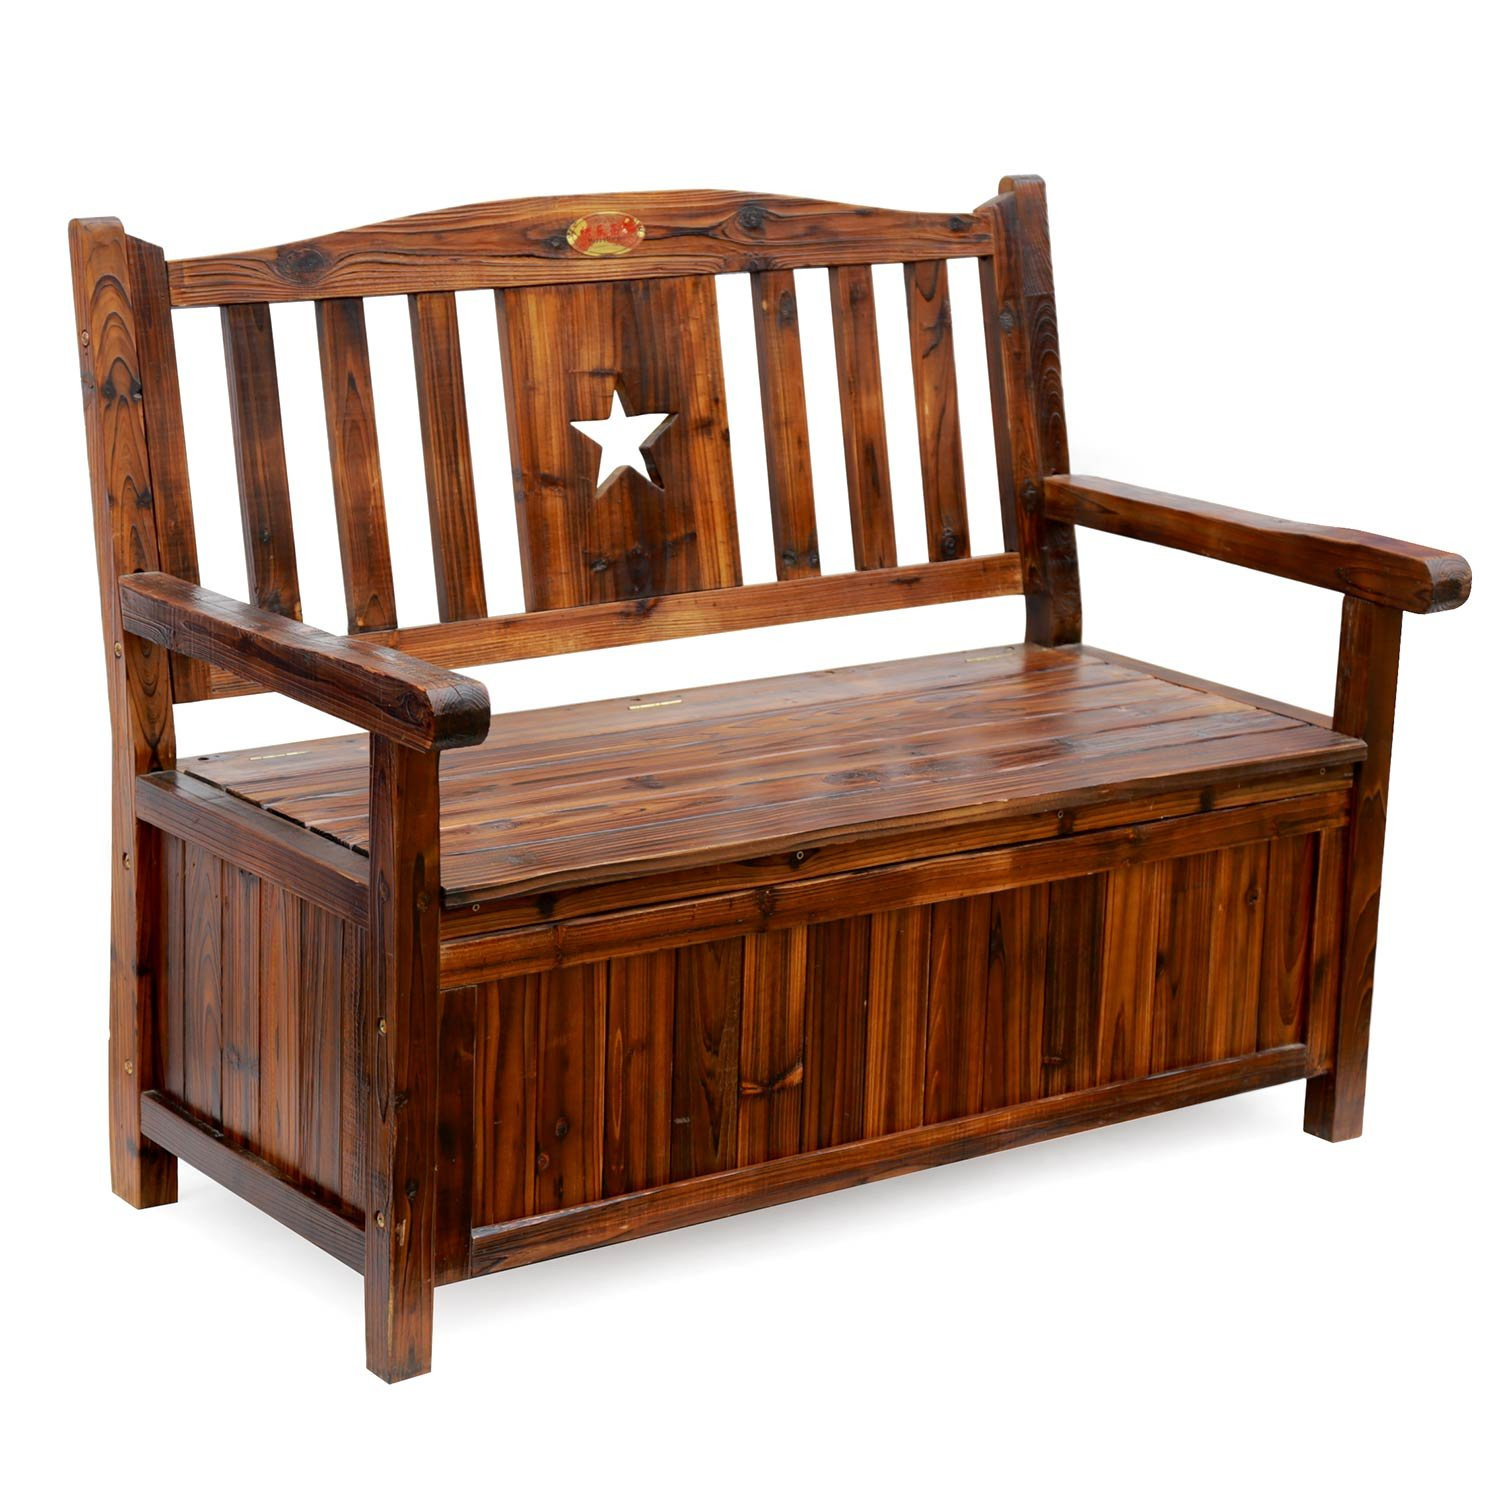 Small Wood Storage Bench
 Best Rated in Outdoor Storage Benches & Helpful Customer